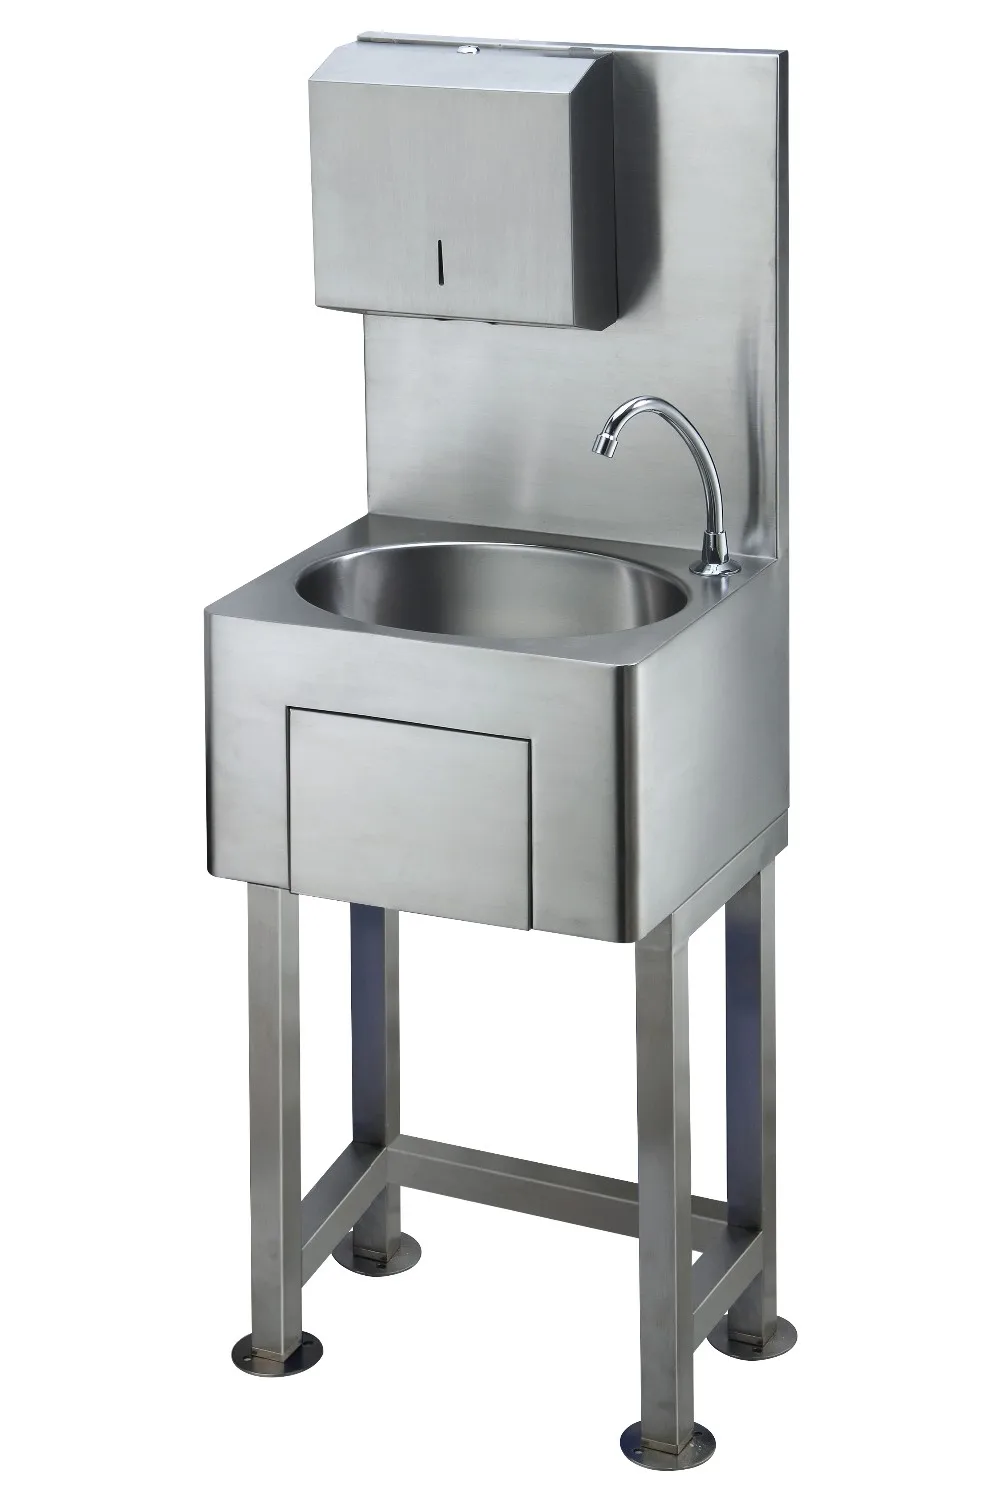 Free Standing Commercial Kitchen Sink Stainless Steel Freestanding Kitchen Sink Stainless Steel Outdoor Sink Buy Freestanding Kitchen Sink Outdoor